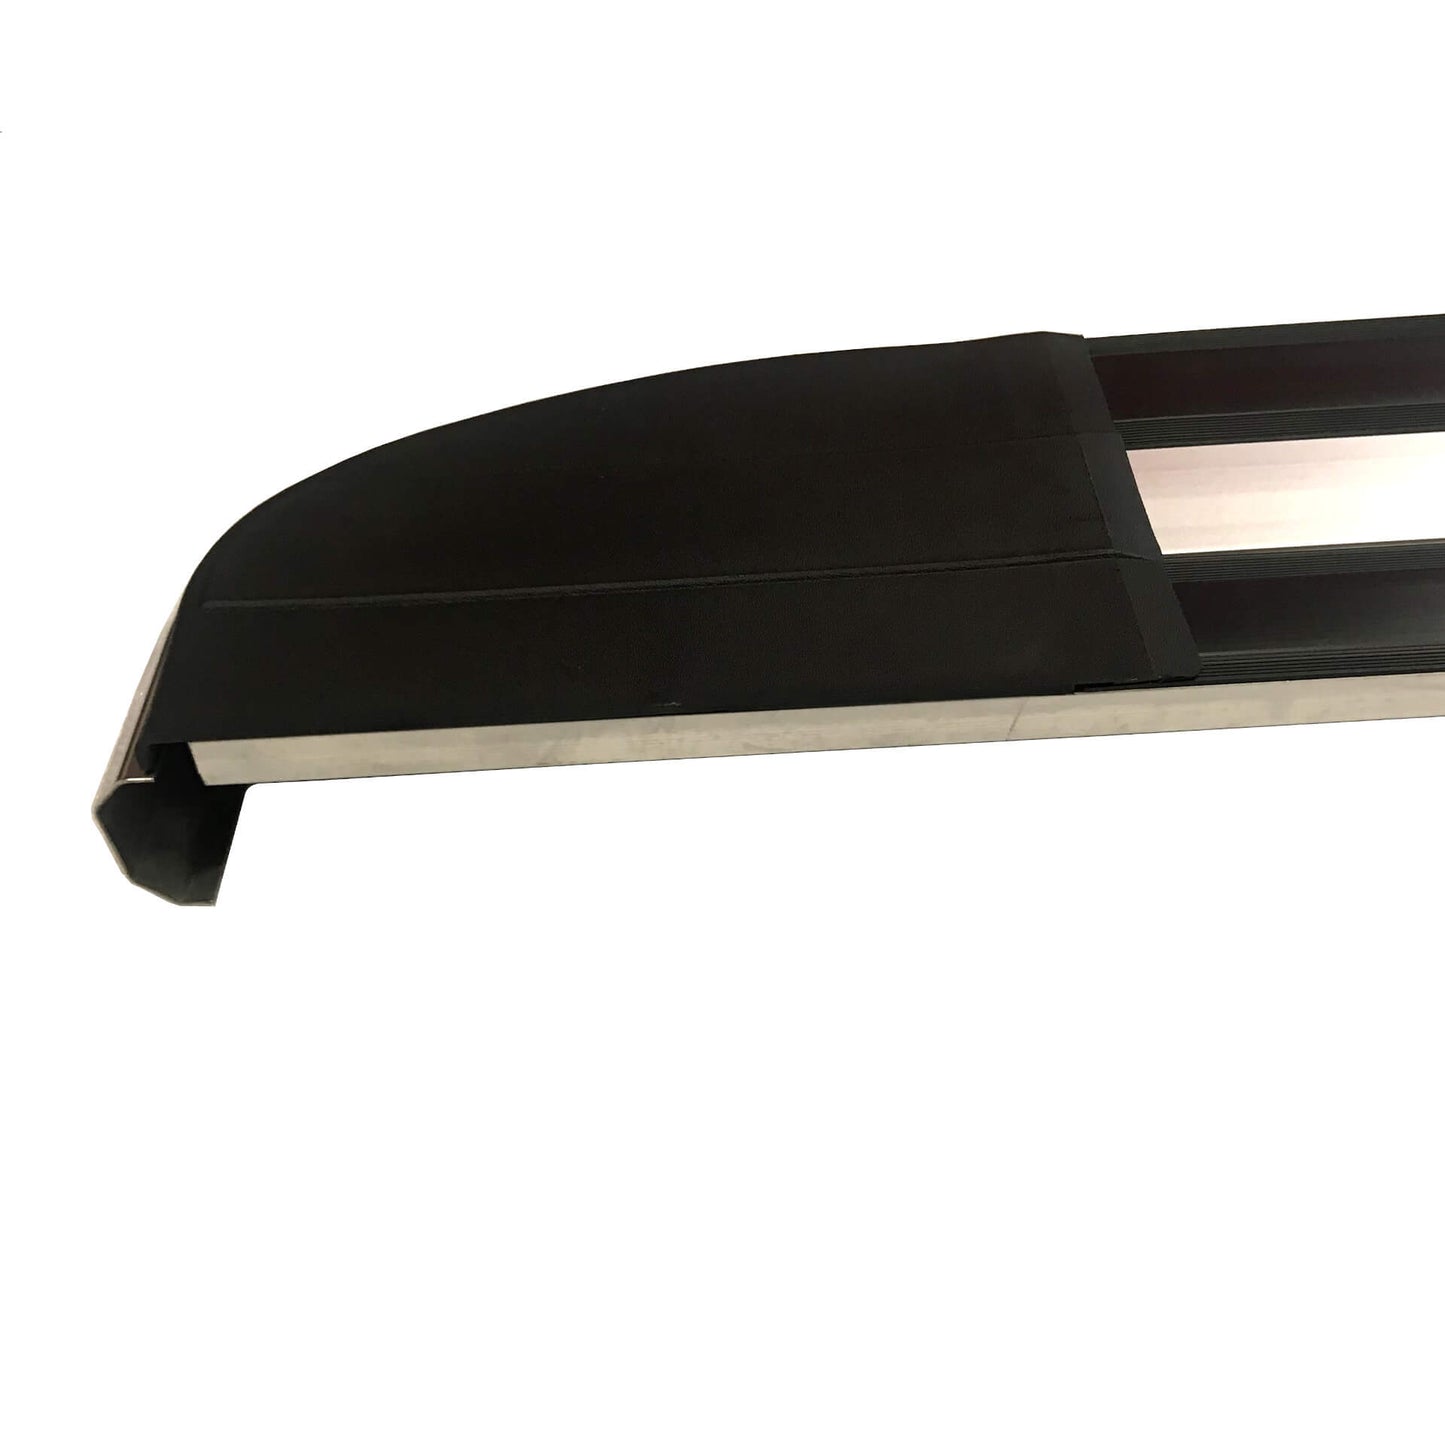 Panther Side Steps Running Boards for Subaru Forester 2008-2013 -  - sold by Direct4x4